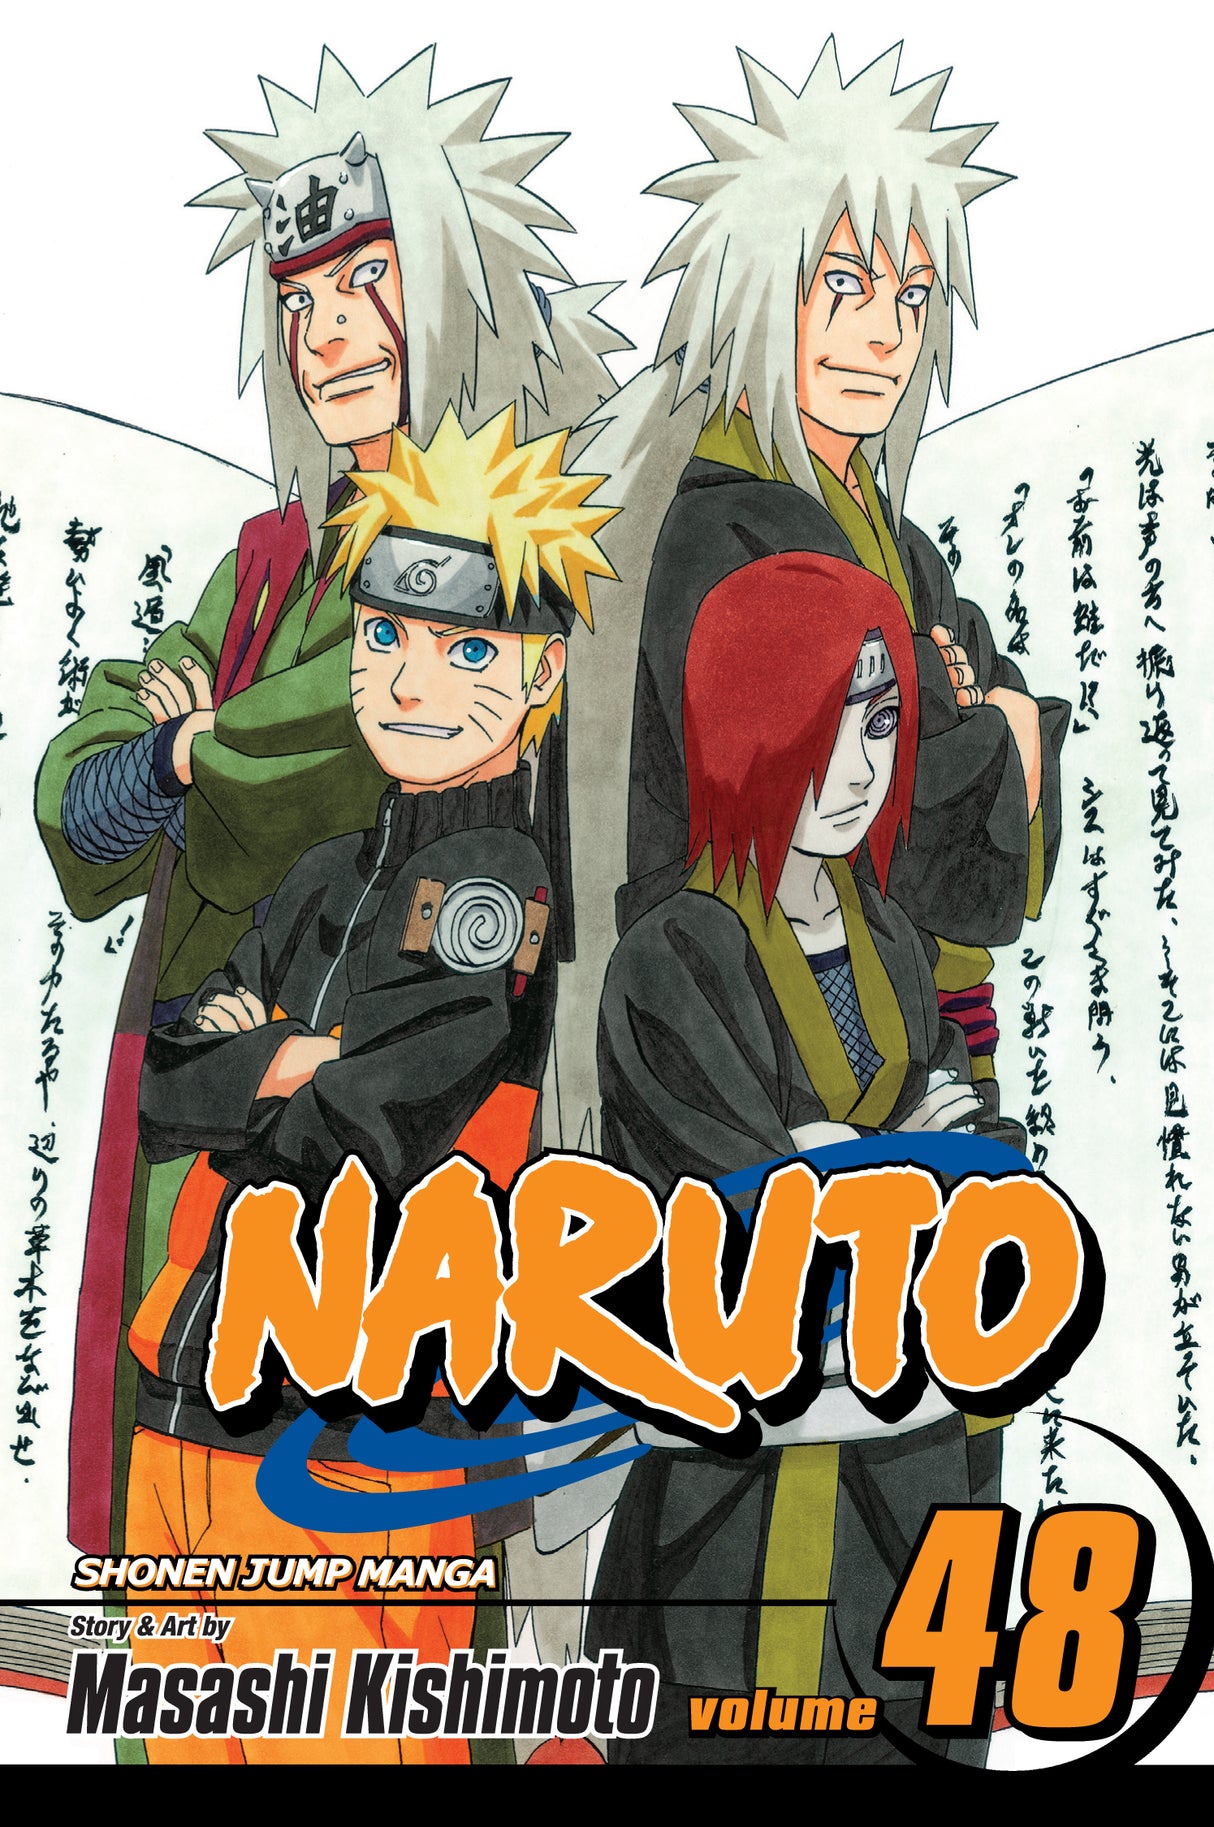 Cover image of the Manga Naruto, Vol.48: The Cheering Village